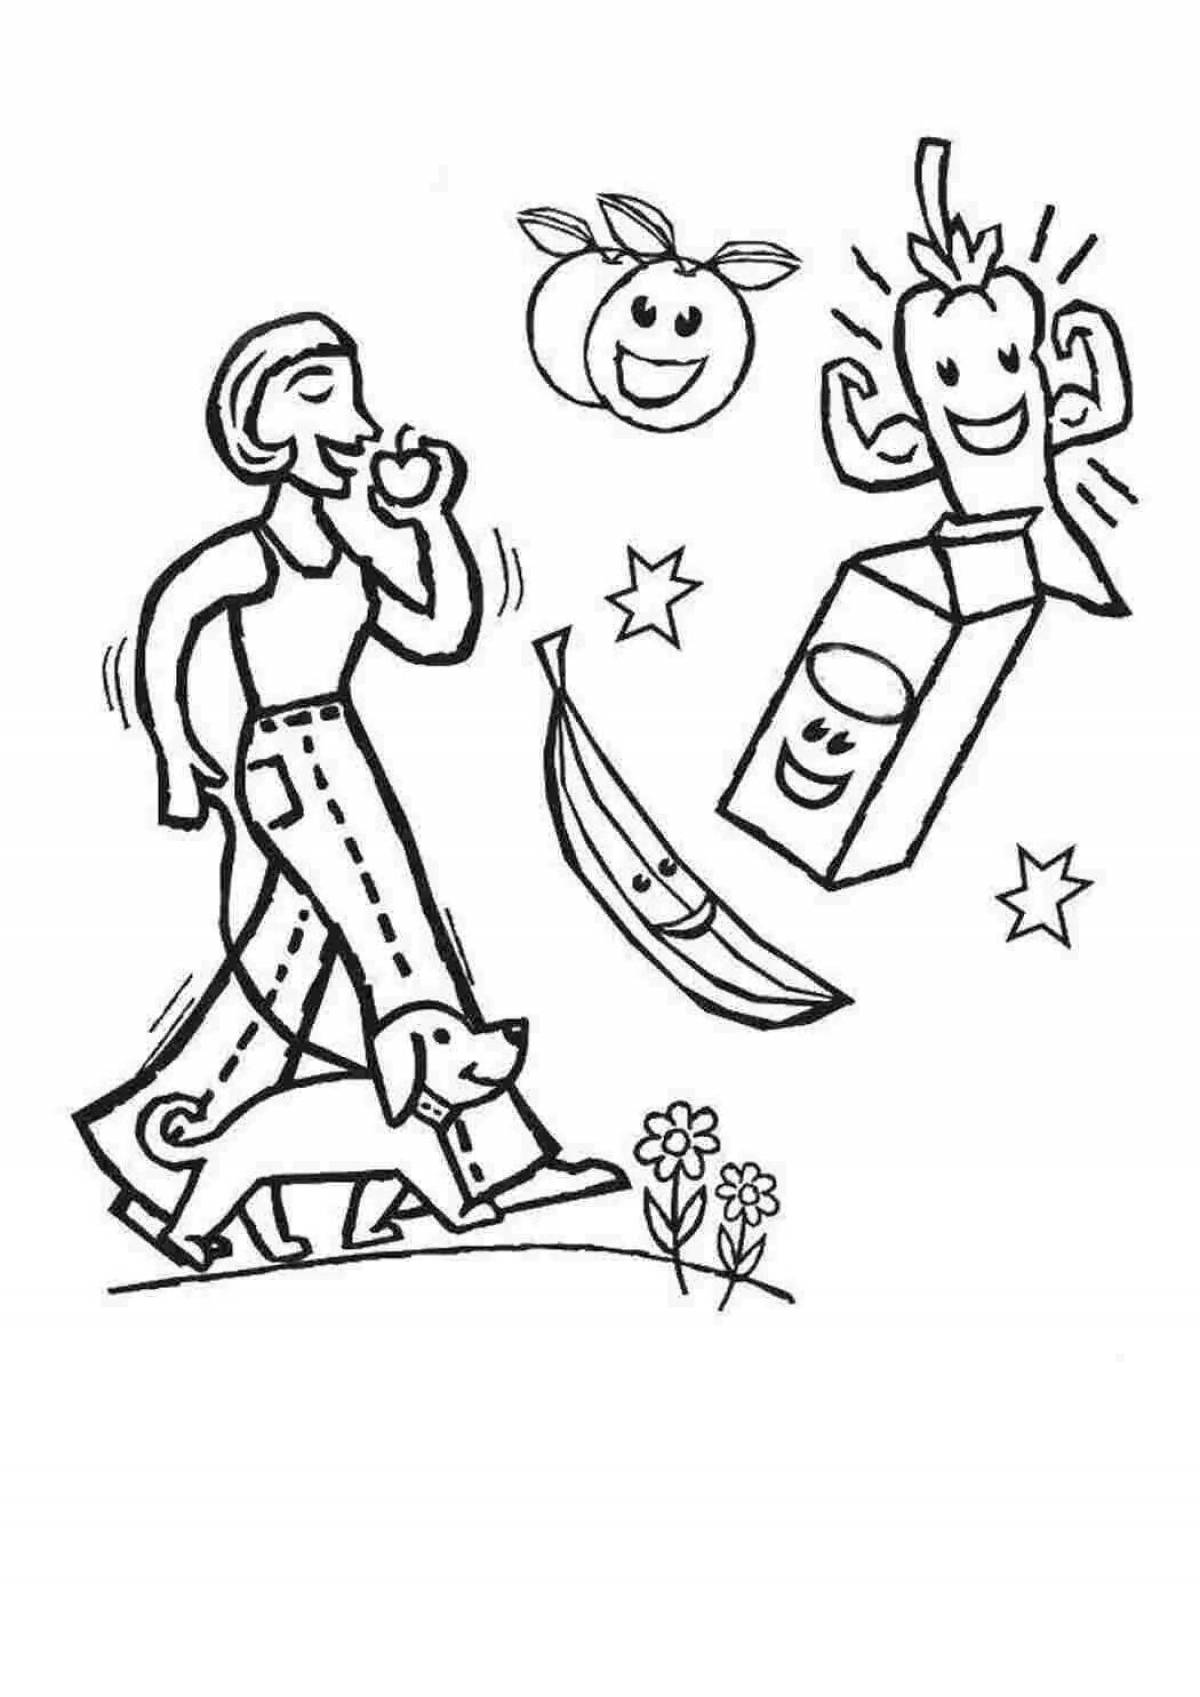 Attraction health coloring page